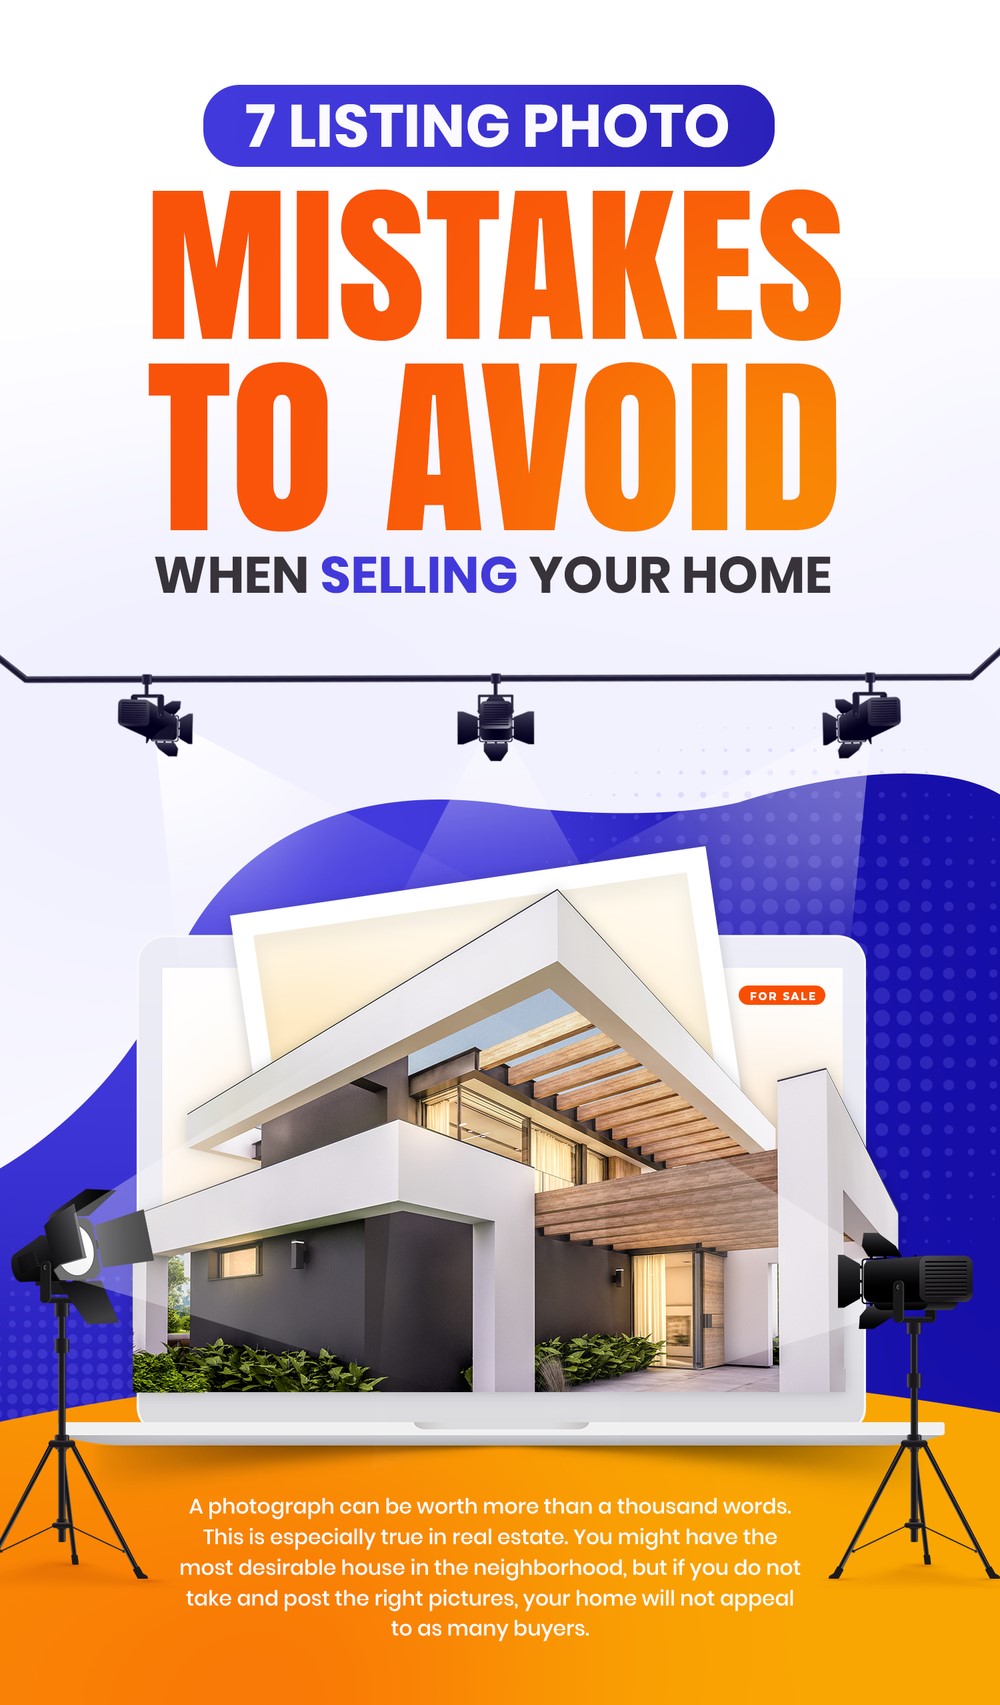 7 Mistakes to avoid when selling your home